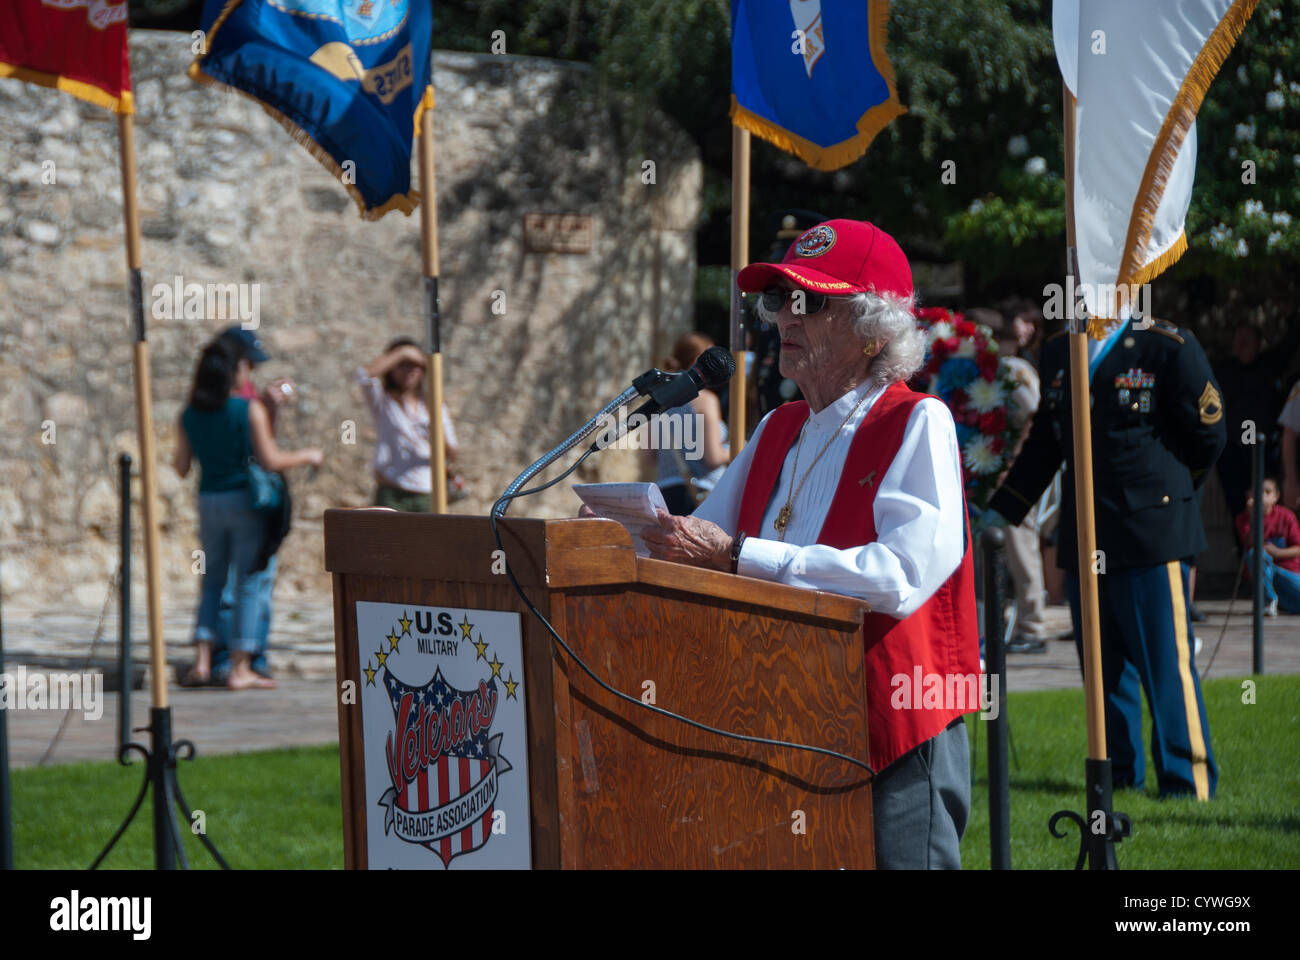 10 November 2012 San Antonio, Texas, USA - Anne Collins, retired Sgt. USMC, speaks at the Veteran's Day memorial in front of the Alamo in San Antonio, Texas.  Ms. Collins, 91, served as a nurse in WW II, Stock Photo